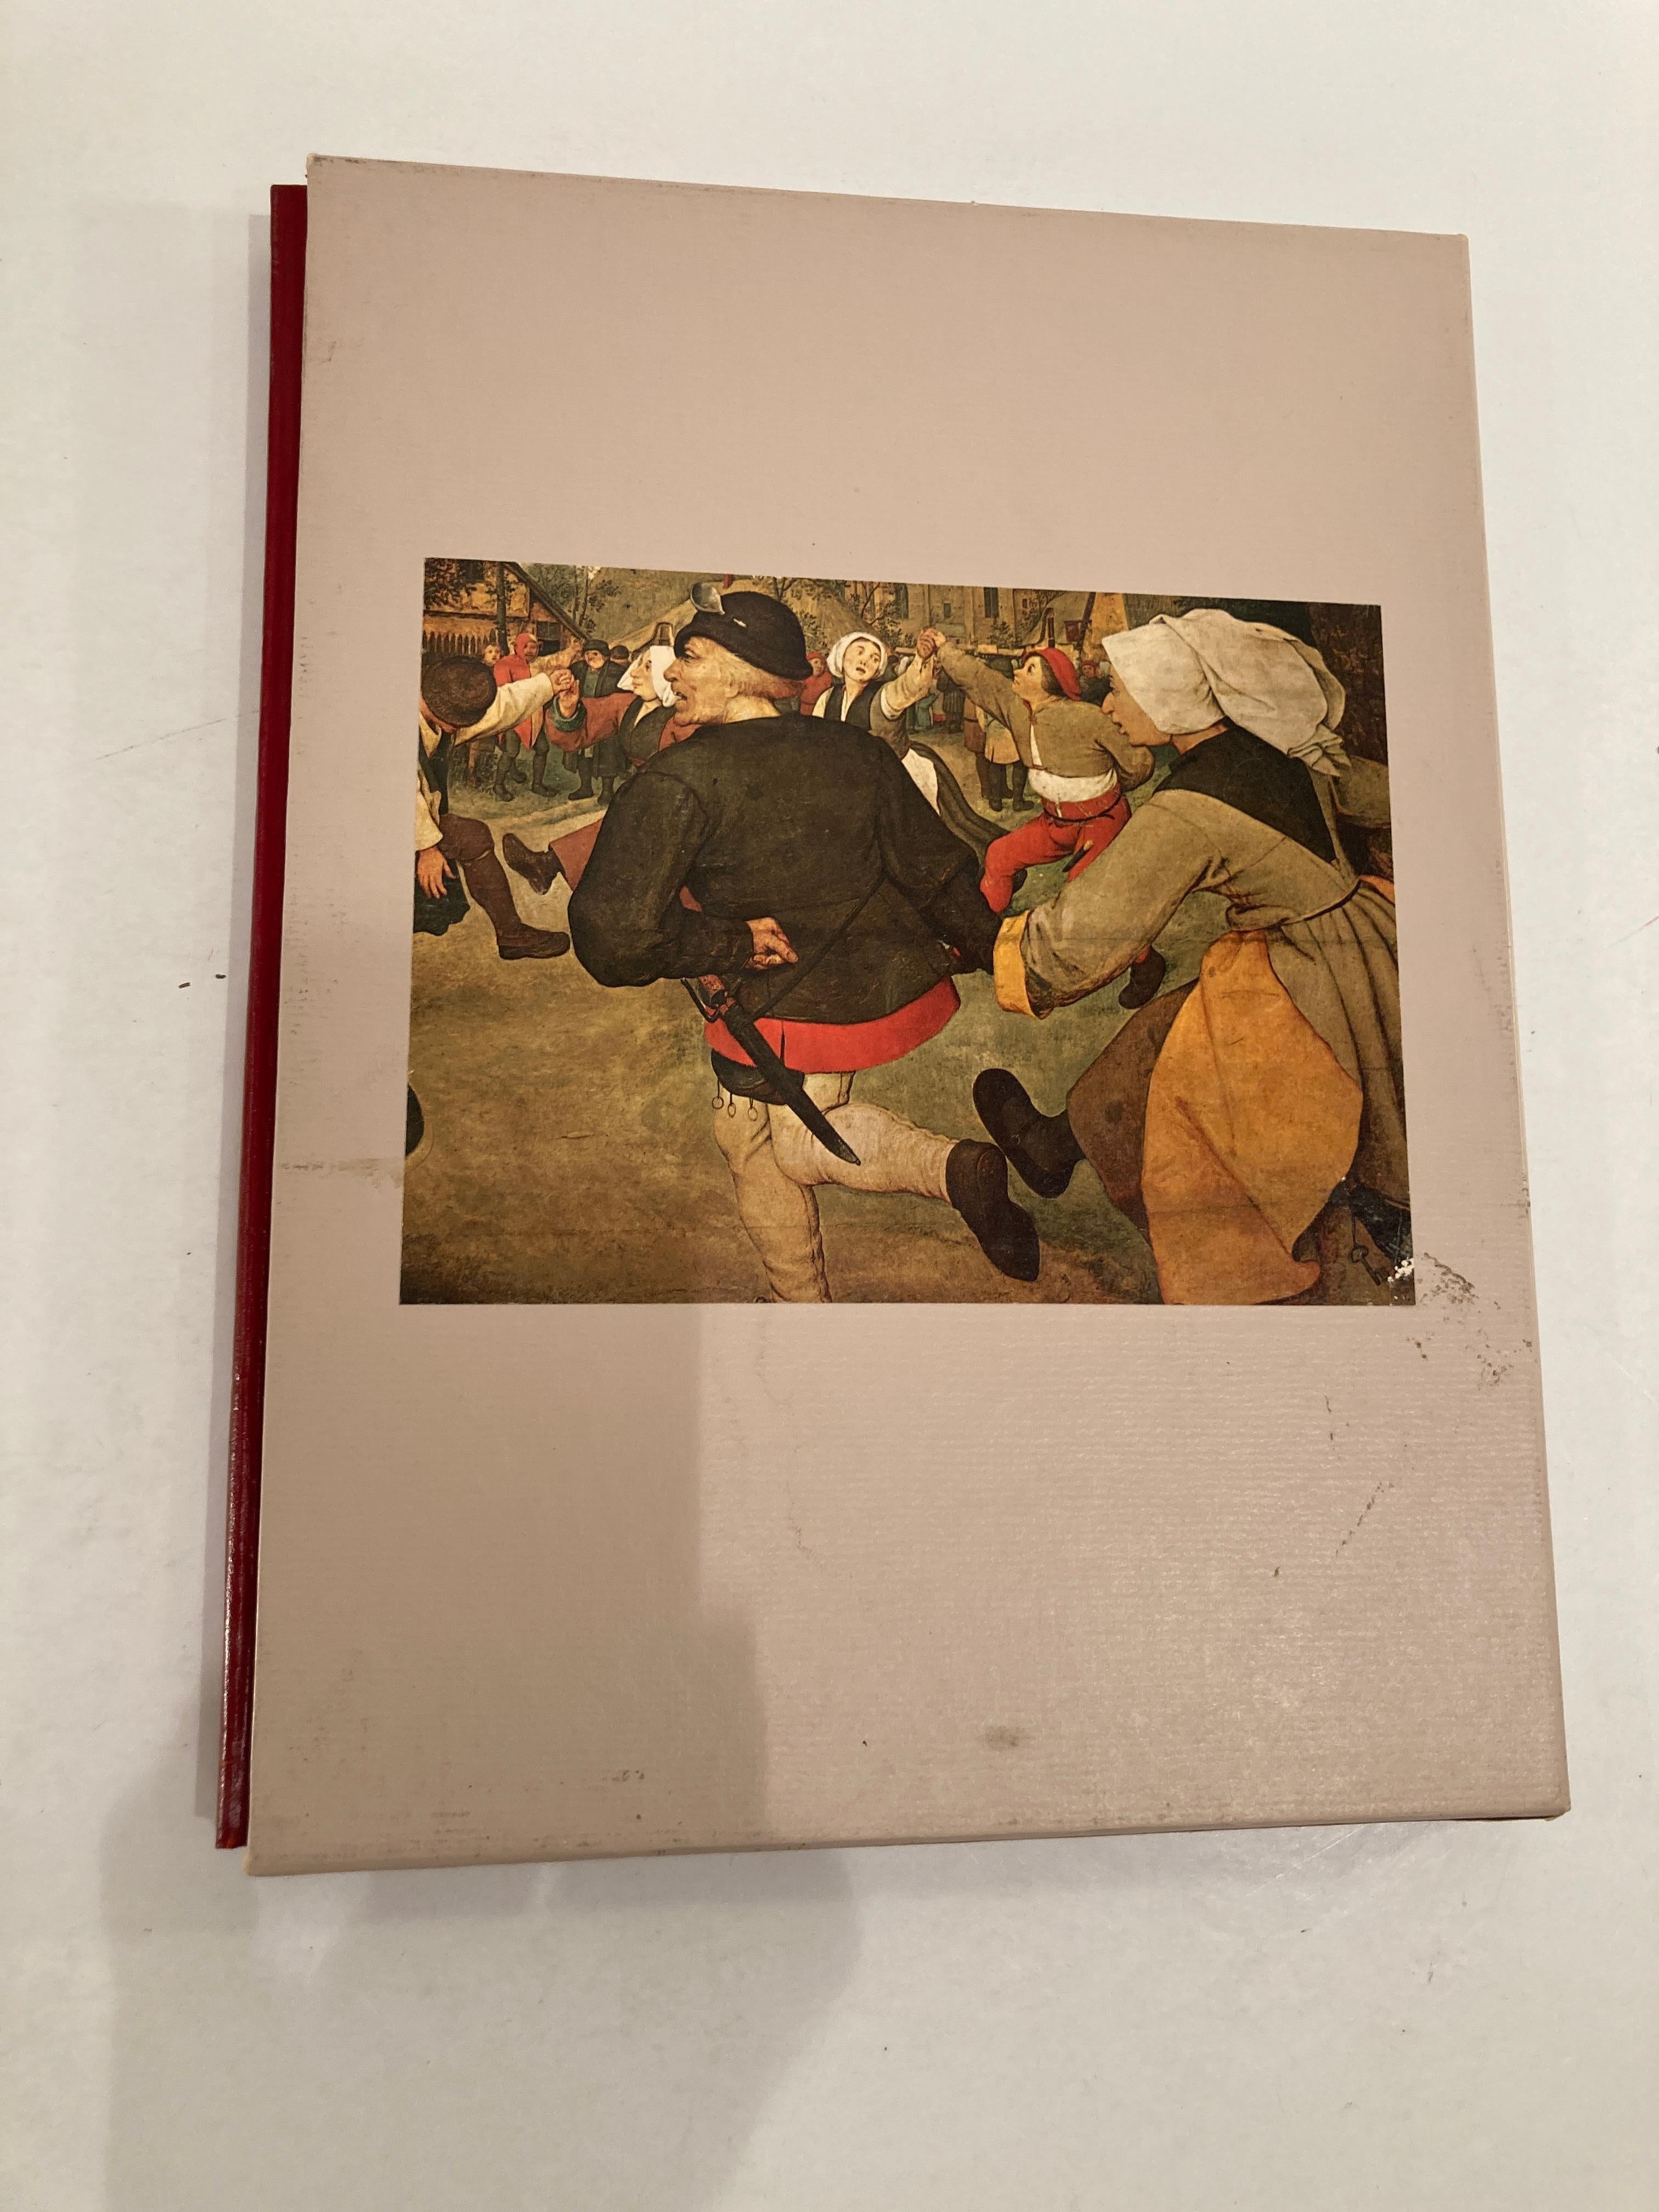 The World of Bruegel, By Timothy Foote hardcover book Slipcase.
The World of Bruegel: 1525-1569.
The work of the Flemish artist discussed in a blend of biography and art criticism with history.
Description: 192 pages : illustrations (some color),